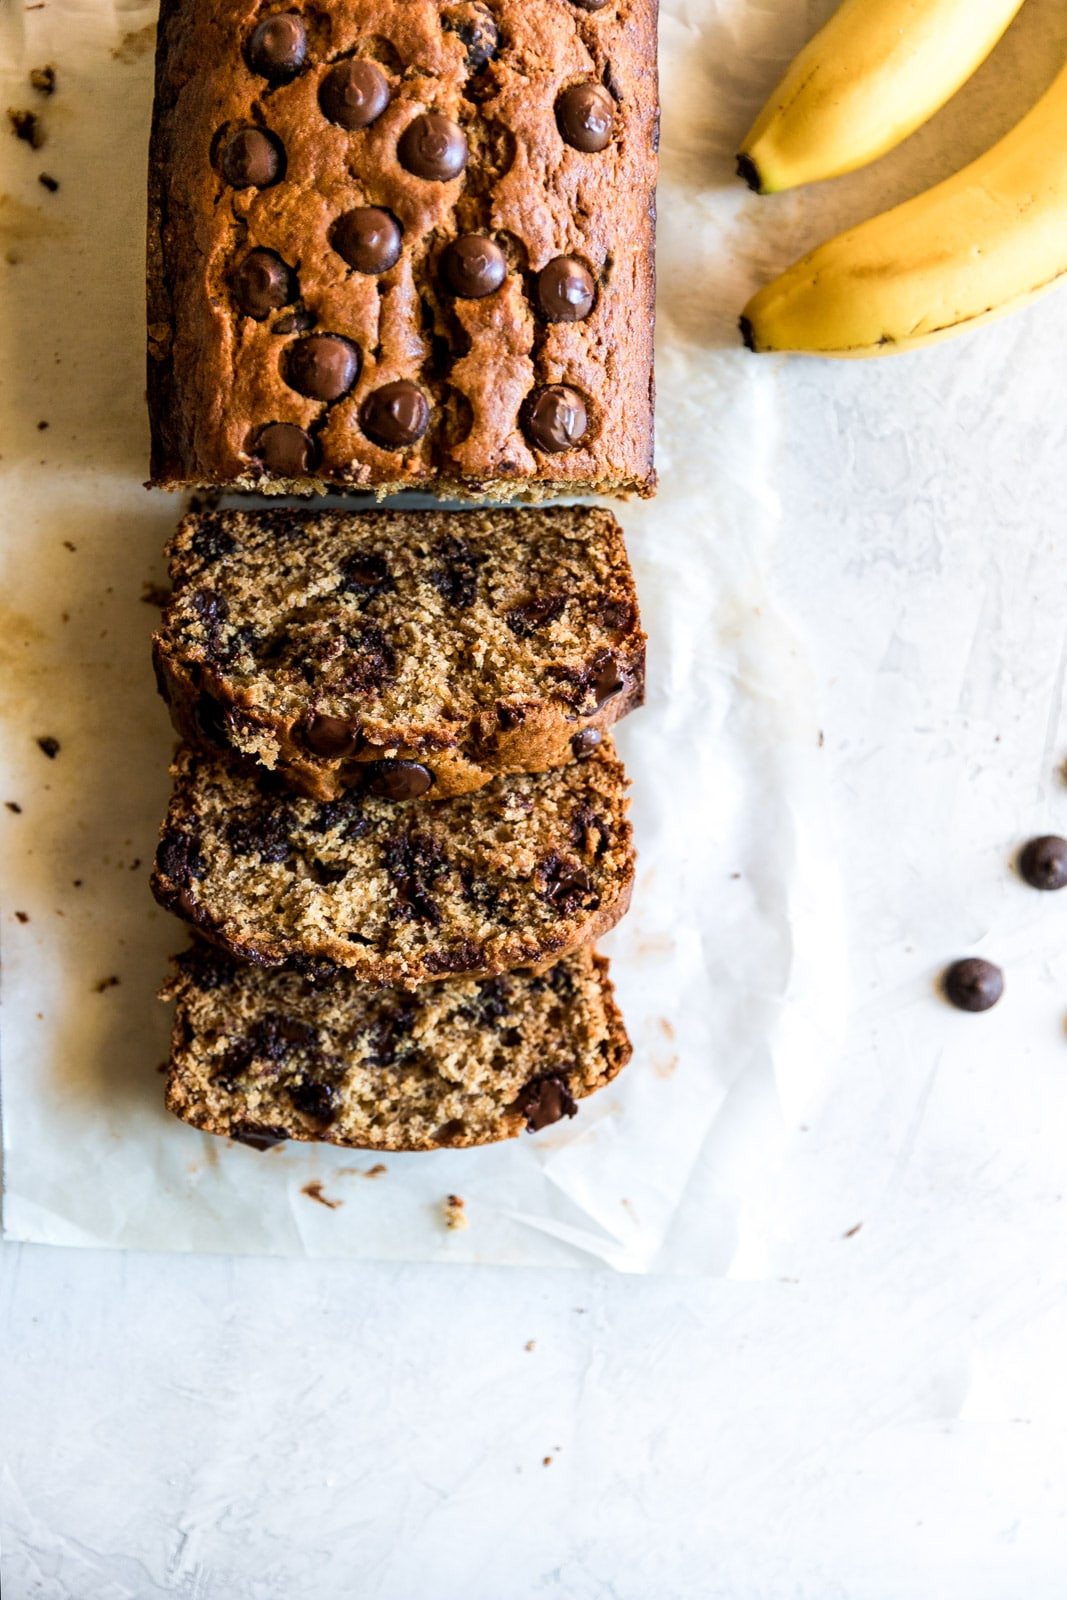 Banana Bread With Chocolate Chips
 Super Moist Chocolate Chip Banana Bread